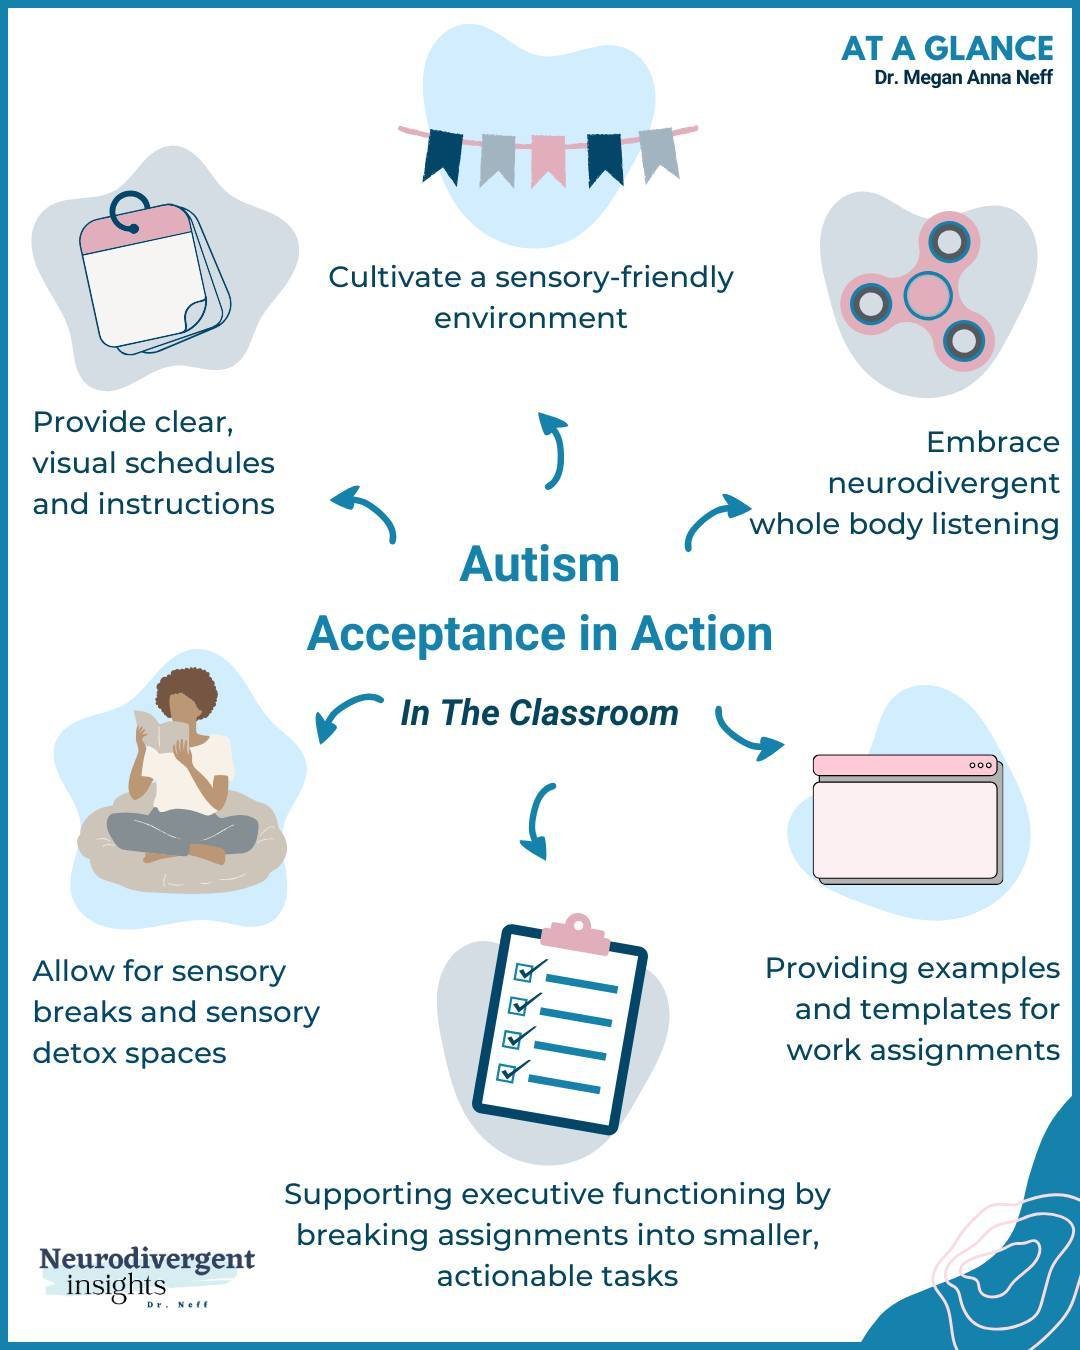 #ConcreteAcceptance: Day 2 of 7 - Autism Inclusion in the Classroom⁠
⁠
Building on our exploration of &quot;autism acceptance,&quot; today's infographic highlights practical strategies for teachers and educators. ⁠
⁠
These steps can help create a mor